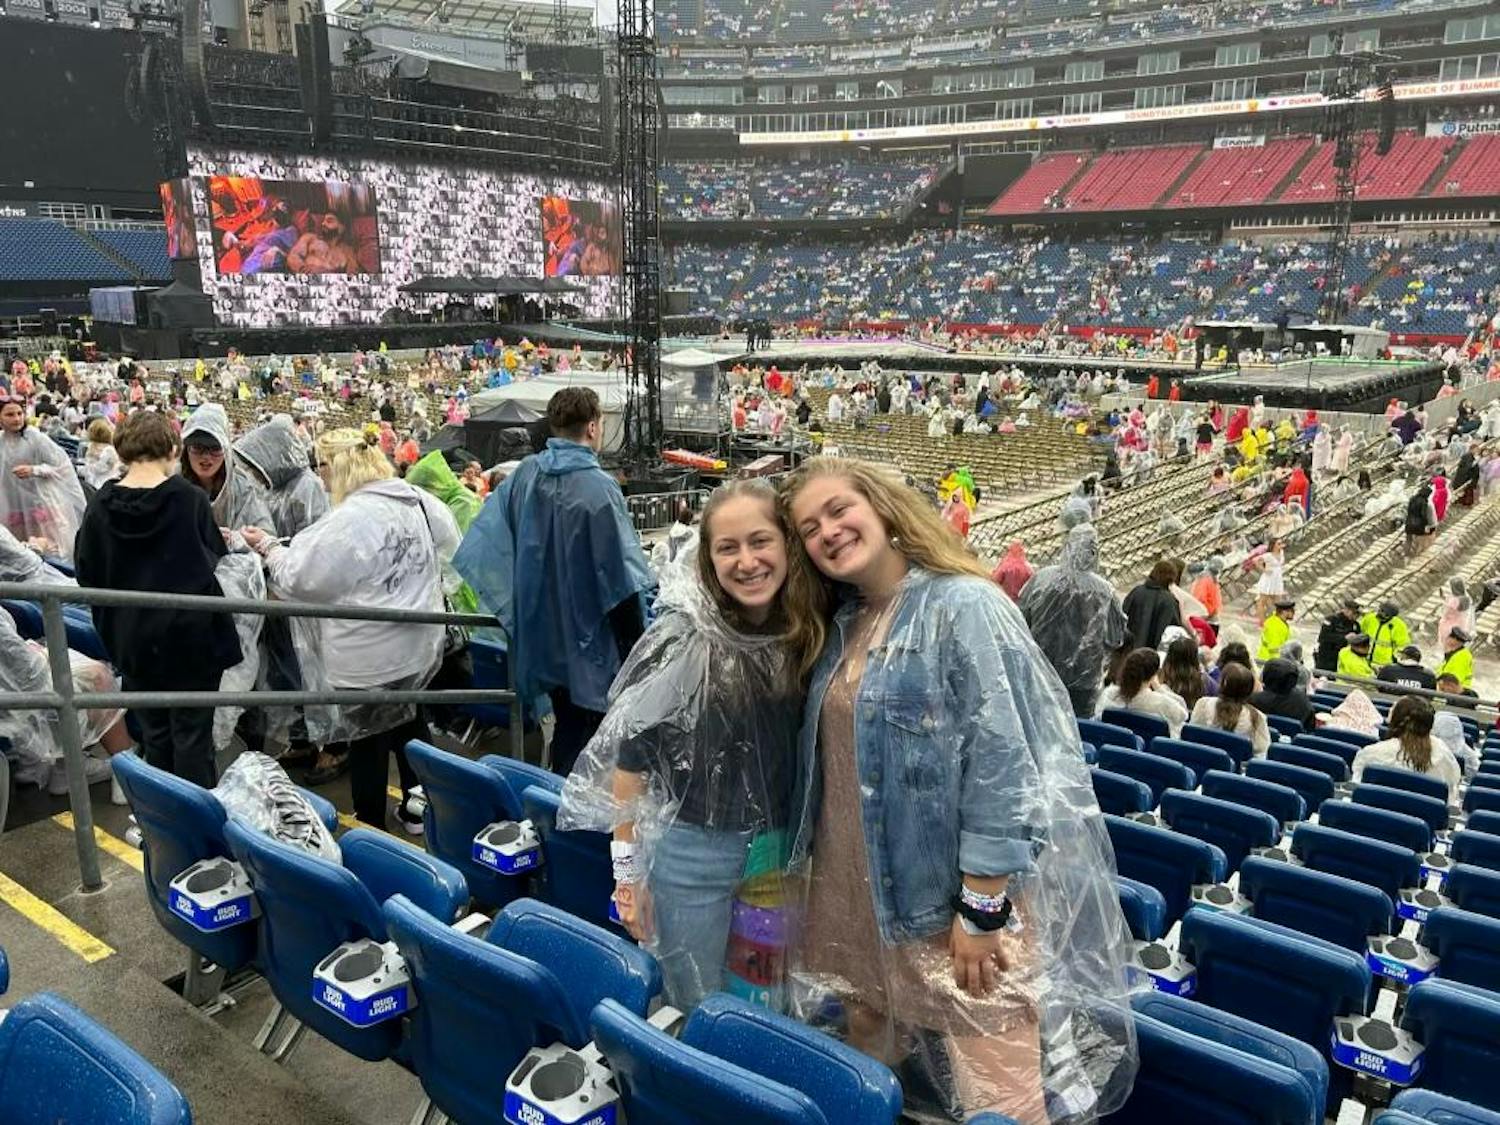 Hannah Friedman and her sister pictured at "The Eras Tour"